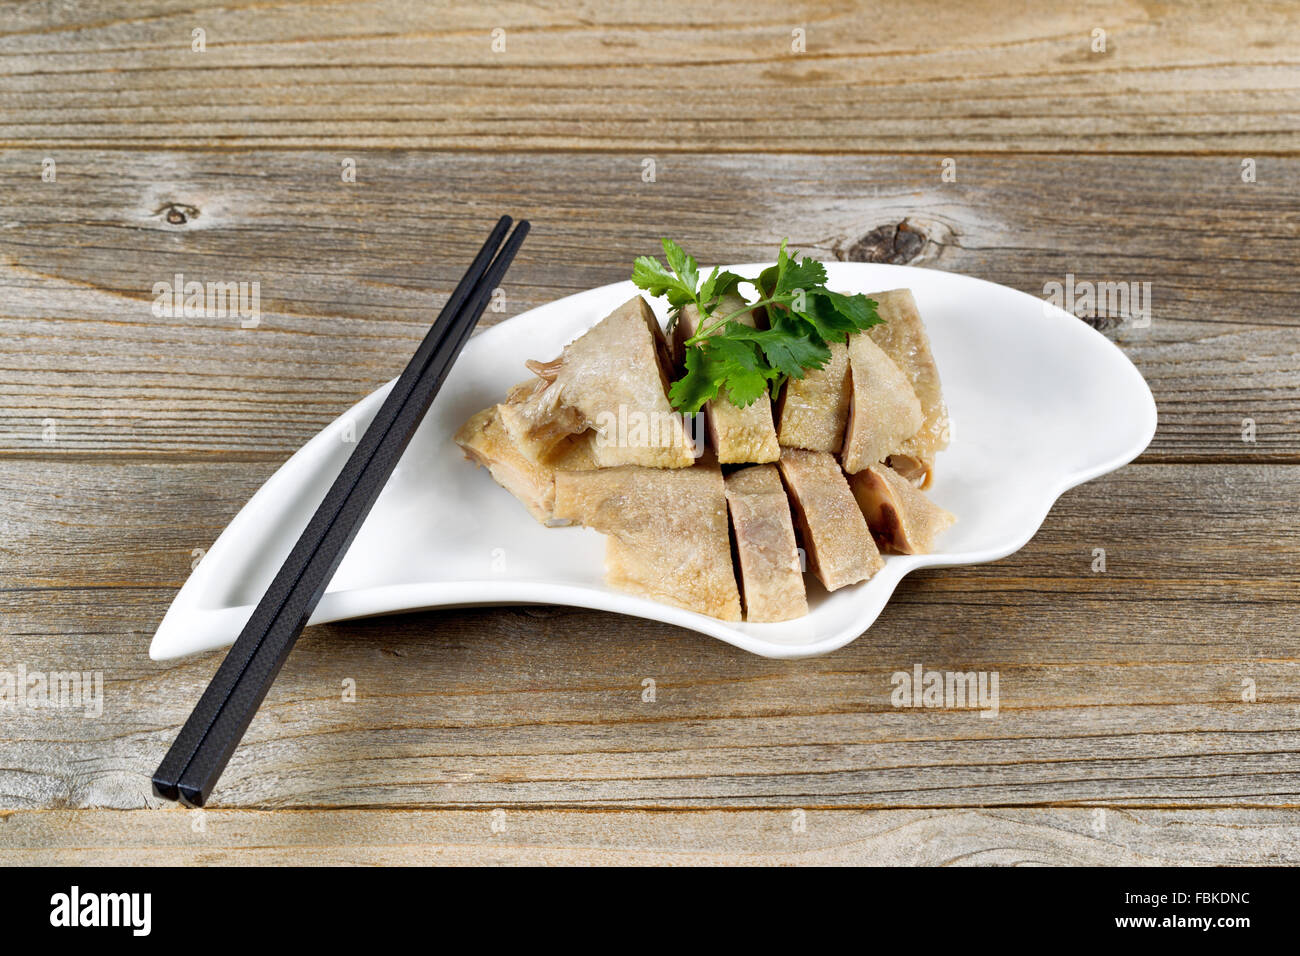 Close up front view of sliced duck meat in small bowl on rustic wood with chopsticks. Stock Photo